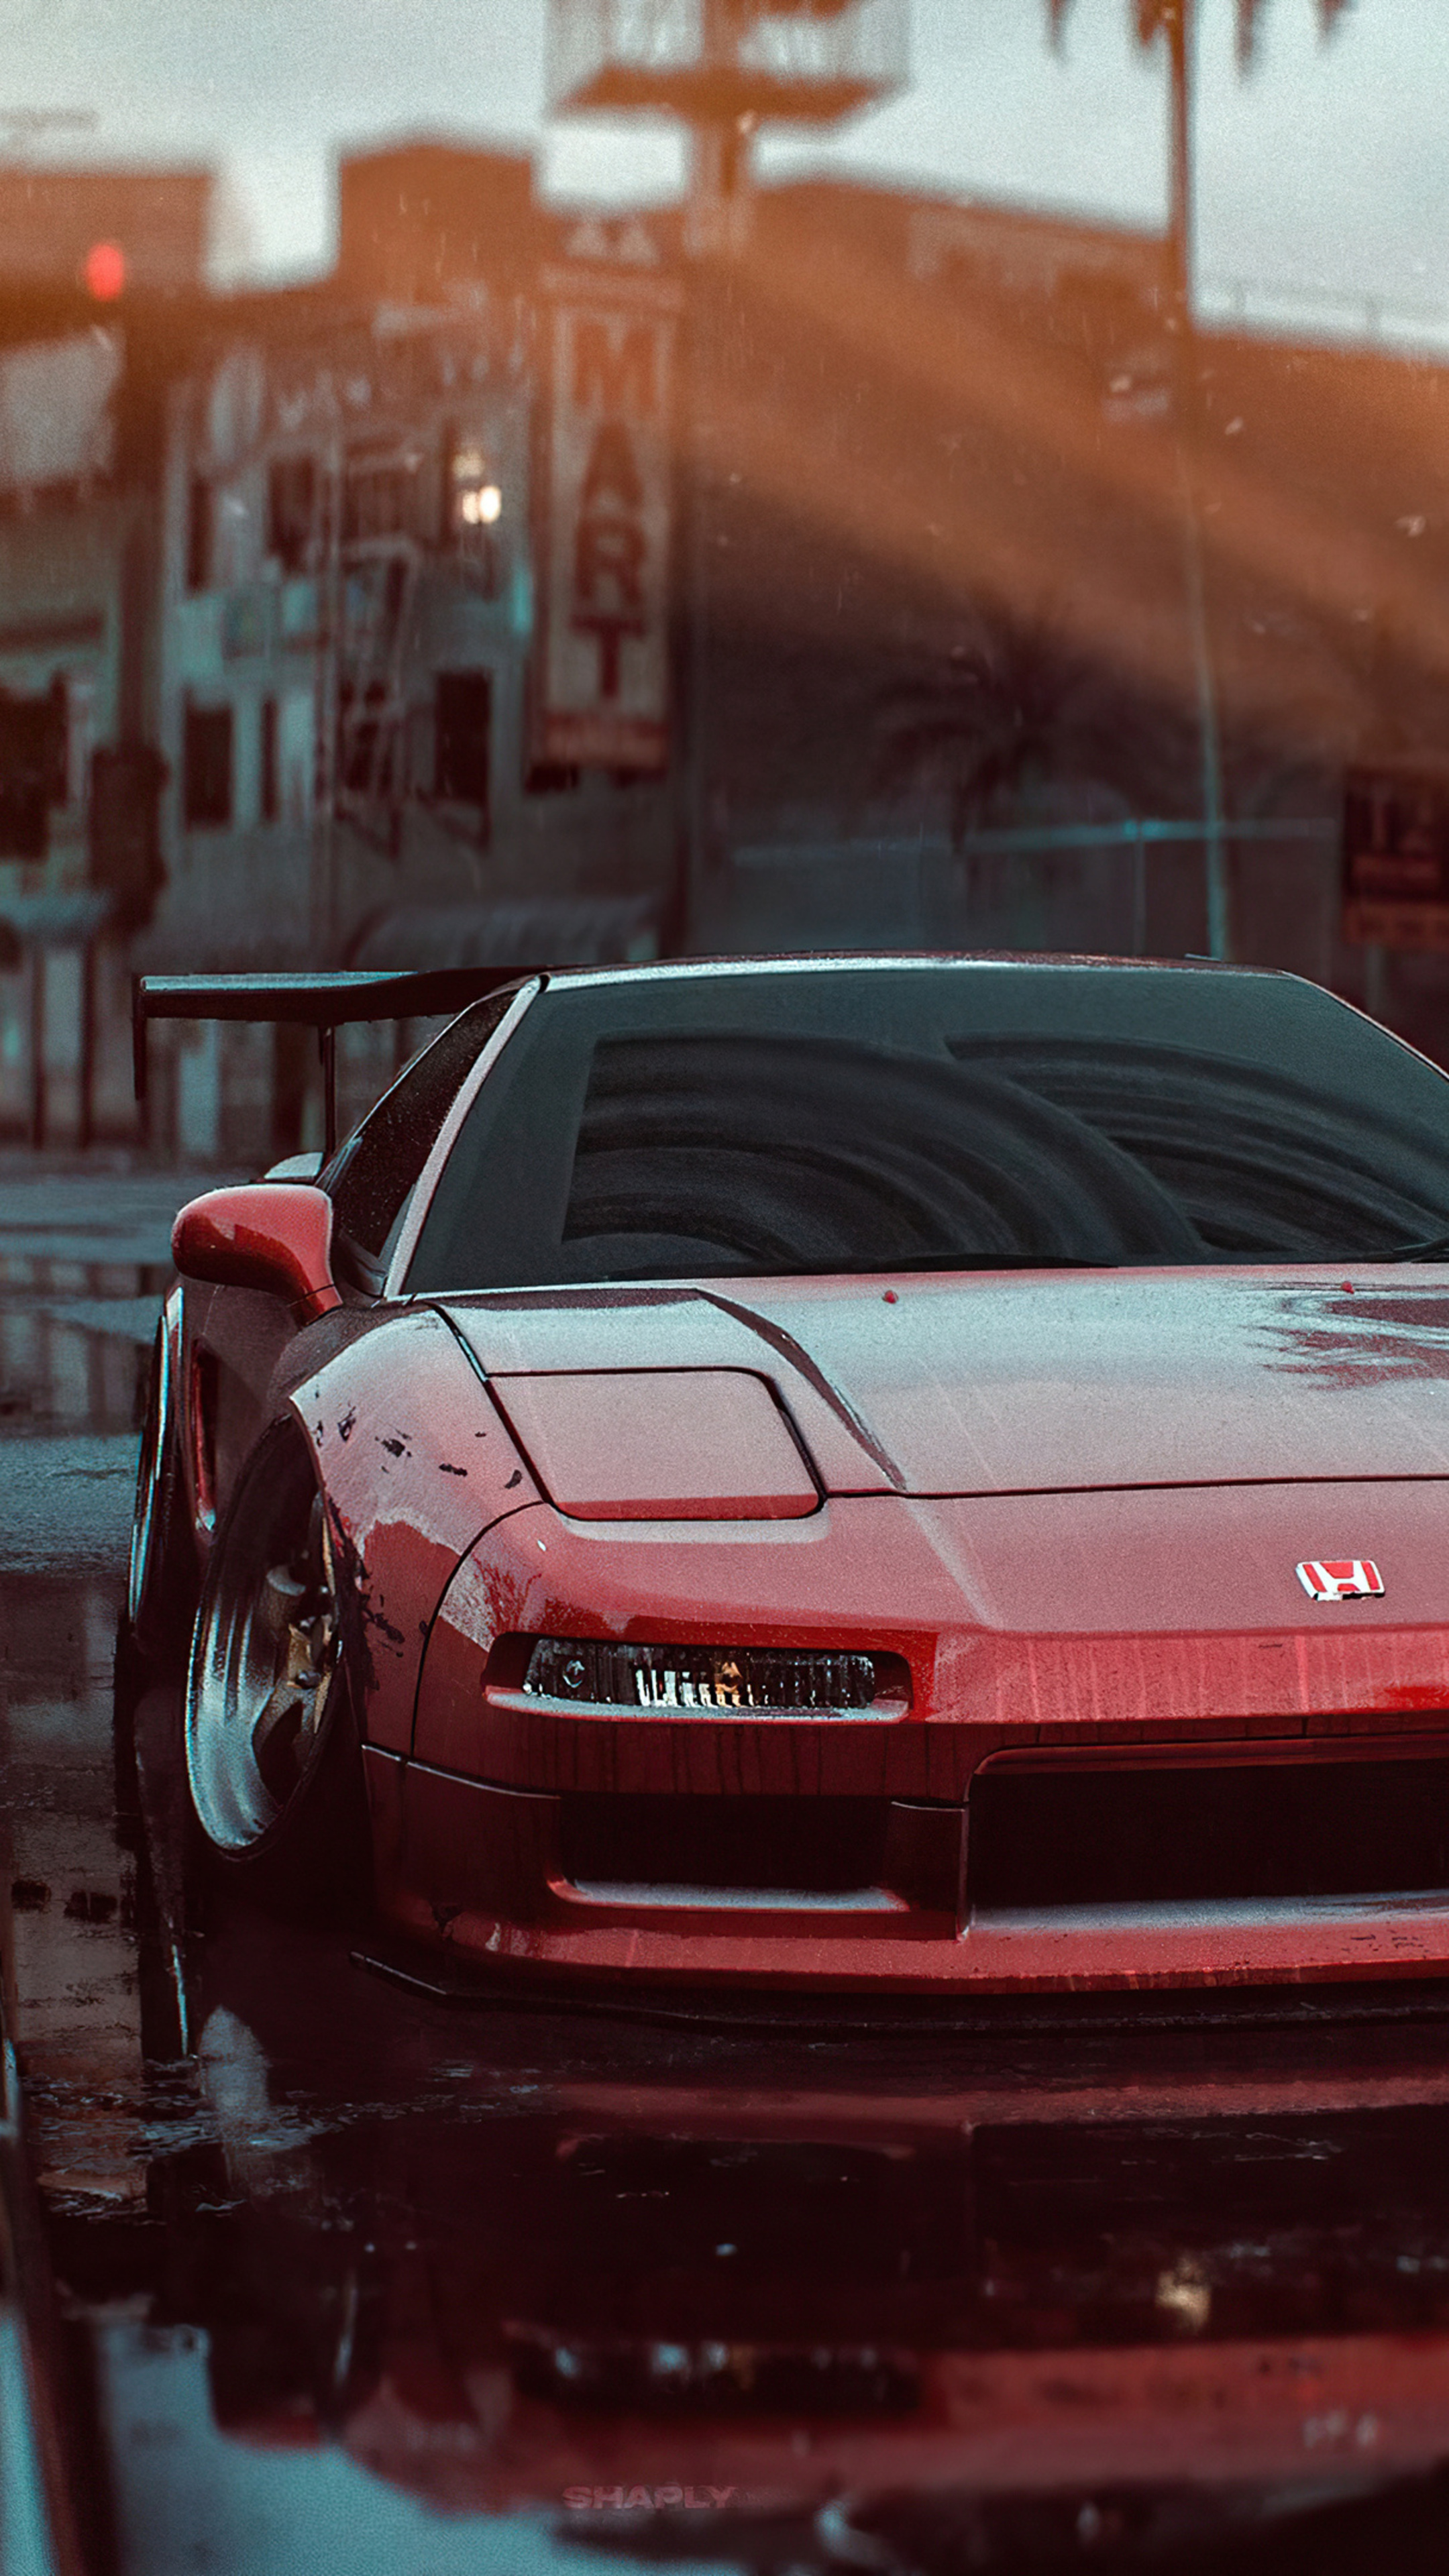 Honda NSX, Need for Speed, 4K car wallpapers, Speed and style, 2160x3840 4K Handy